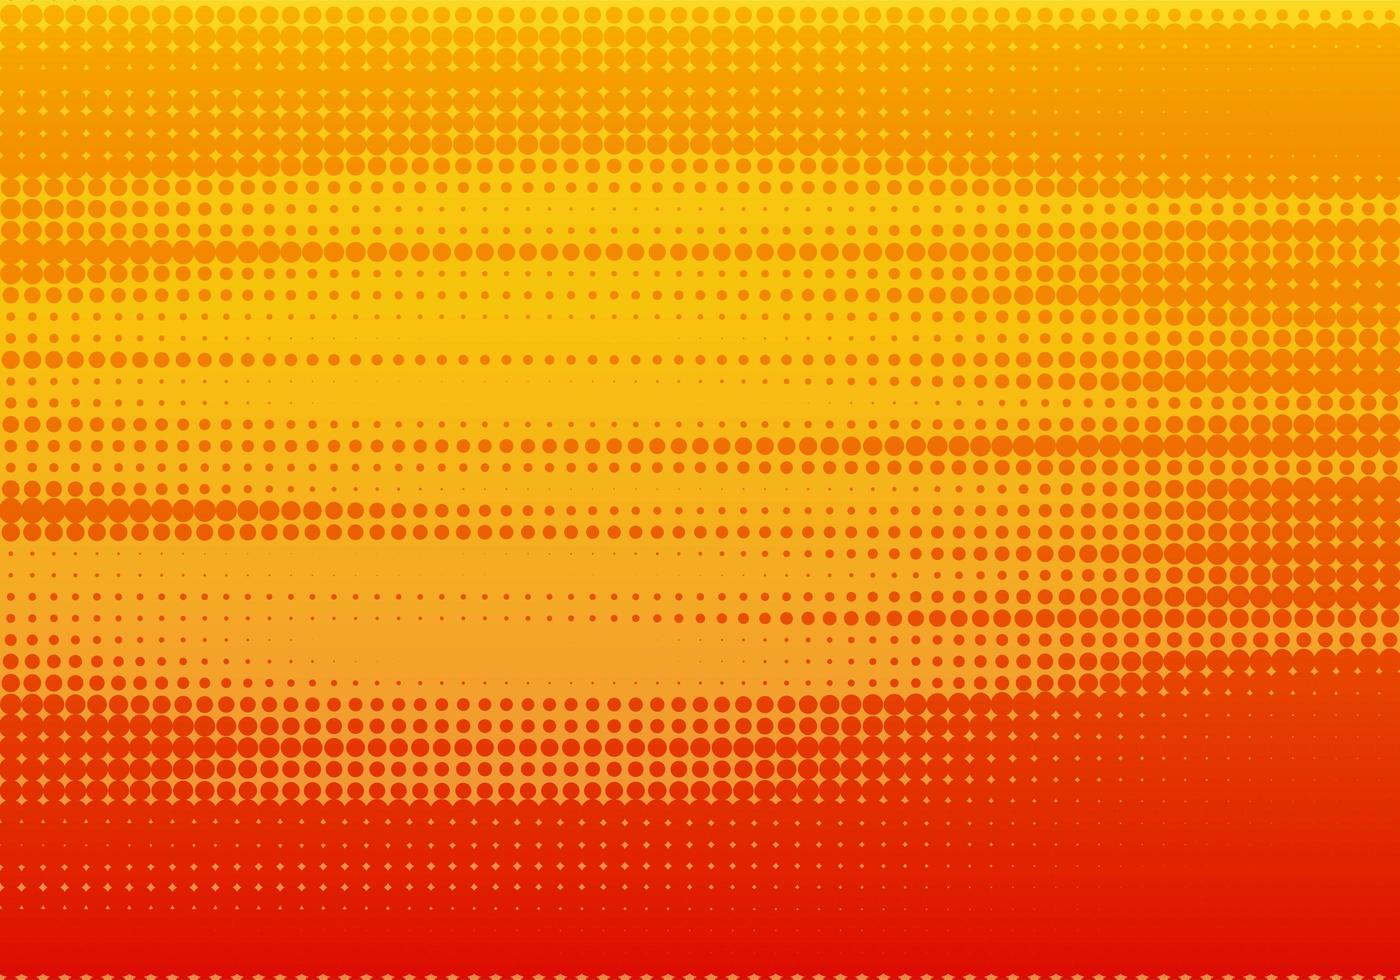 Red and orange dotted pattern design vector